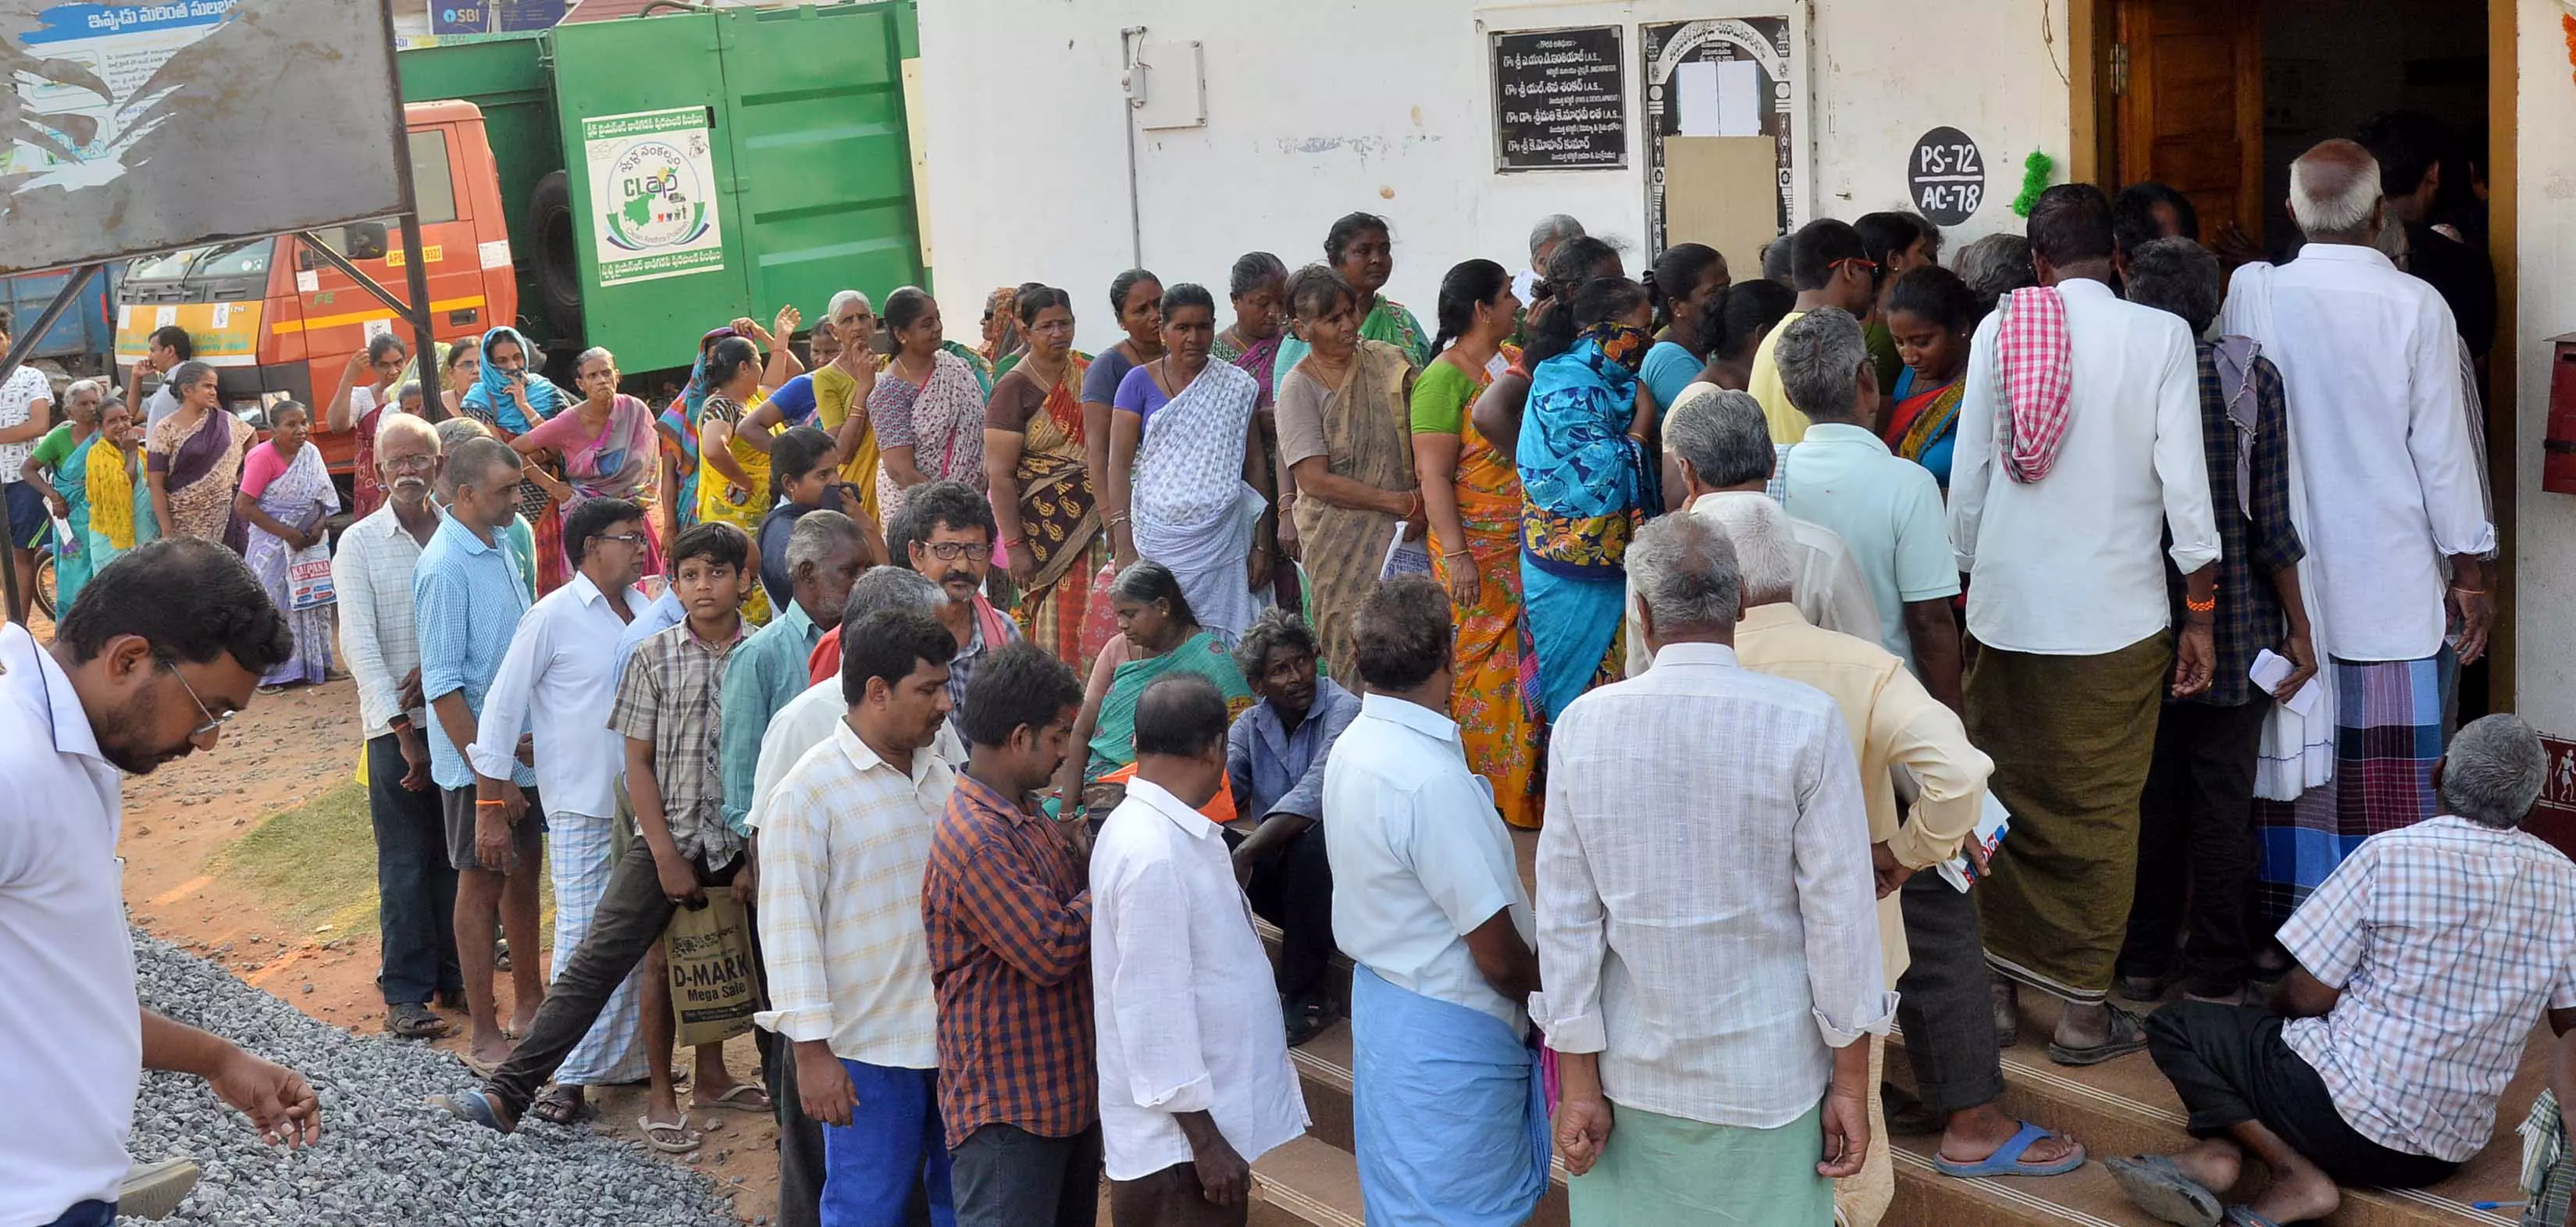 Aged pensioners face hardships to collect pension in Andhra Pradesh